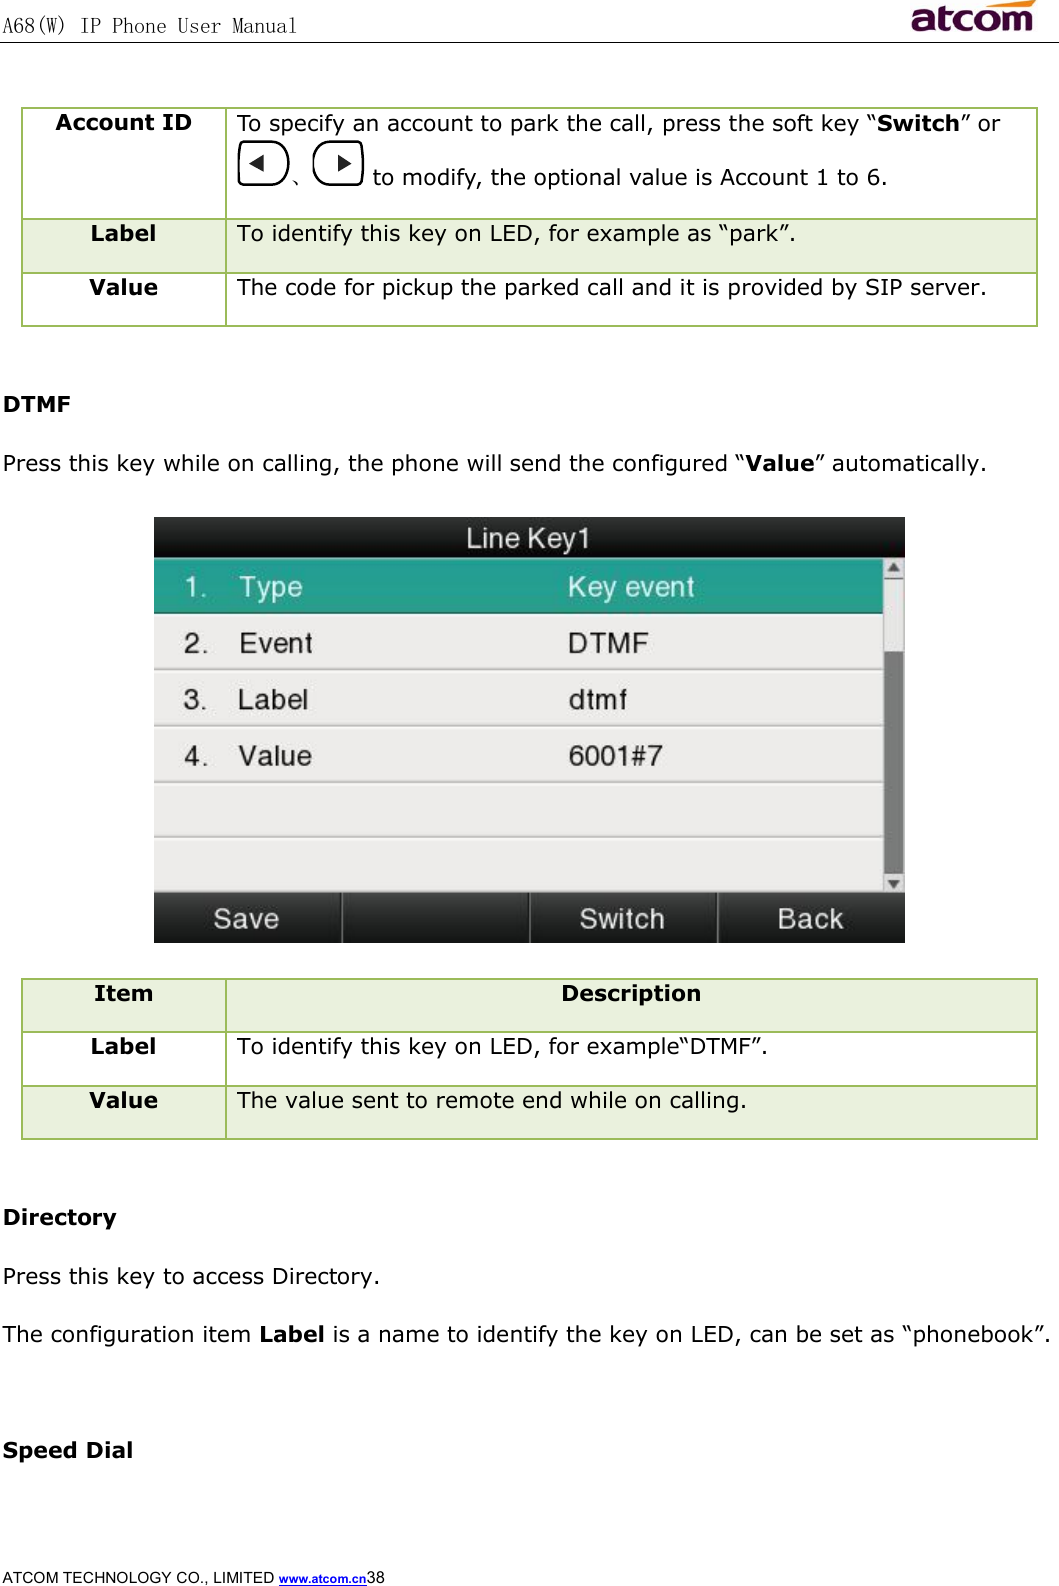 A68(W) IP Phone User Manual                                                           ATCOM TECHNOLOGY CO., LIMITED www.atcom.cn38   Account ID  To specify an account to park the call, press the soft key “Switch” or 、 to modify, the optional value is Account 1 to 6. Label  To identify this key on LED, for example as “park”. Value  The code for pickup the parked call and it is provided by SIP server.  DTMF Press this key while on calling, the phone will send the configured “Value” automatically.  Item  Description Label  To identify this key on LED, for example“DTMF”. Value The value sent to remote end while on calling.  Directory Press this key to access Directory. The configuration item Label is a name to identify the key on LED, can be set as “phonebook”.  Speed Dial 